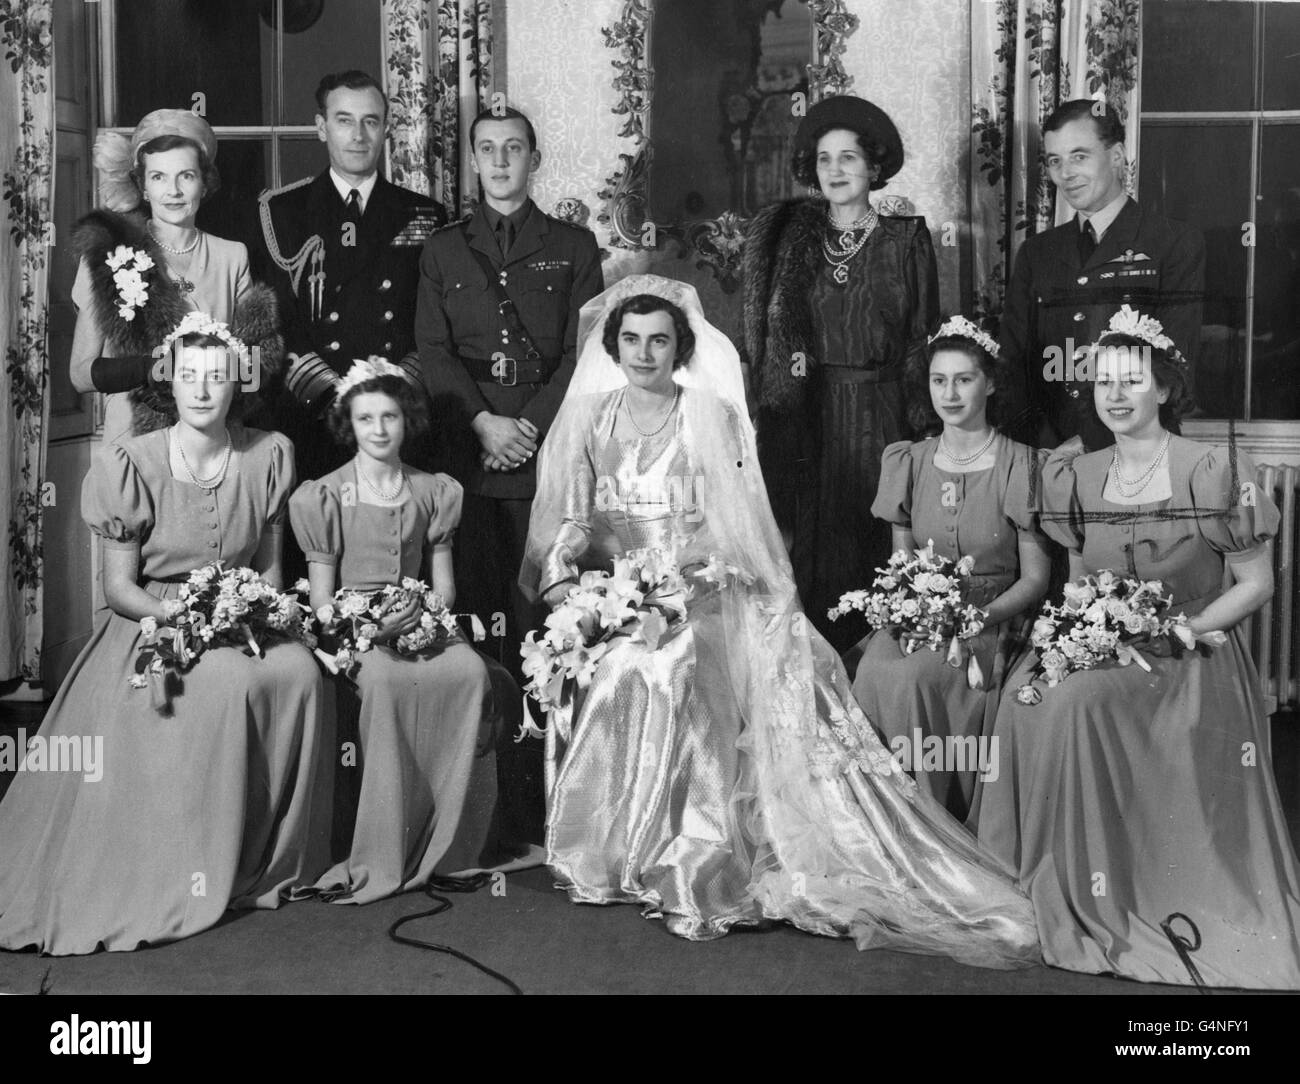 The wedding group at the reception held at Broadlands, the Mountbatten home. Back row, left to right; Countess Mountbatten; Earl Mountbatten; the groom, Lord Brabourne; Baroness Brabourne and the best man Squadron leader Charles Harris St. John. Front row, seated, left to right; the Hon. Pamela Mountbatten, sister of the bride; Princess Alexandra of Kent; the bride the Hon. Patricia Mountbatten; Princess Margaret; and Princess Elizabeth. Stock Photo